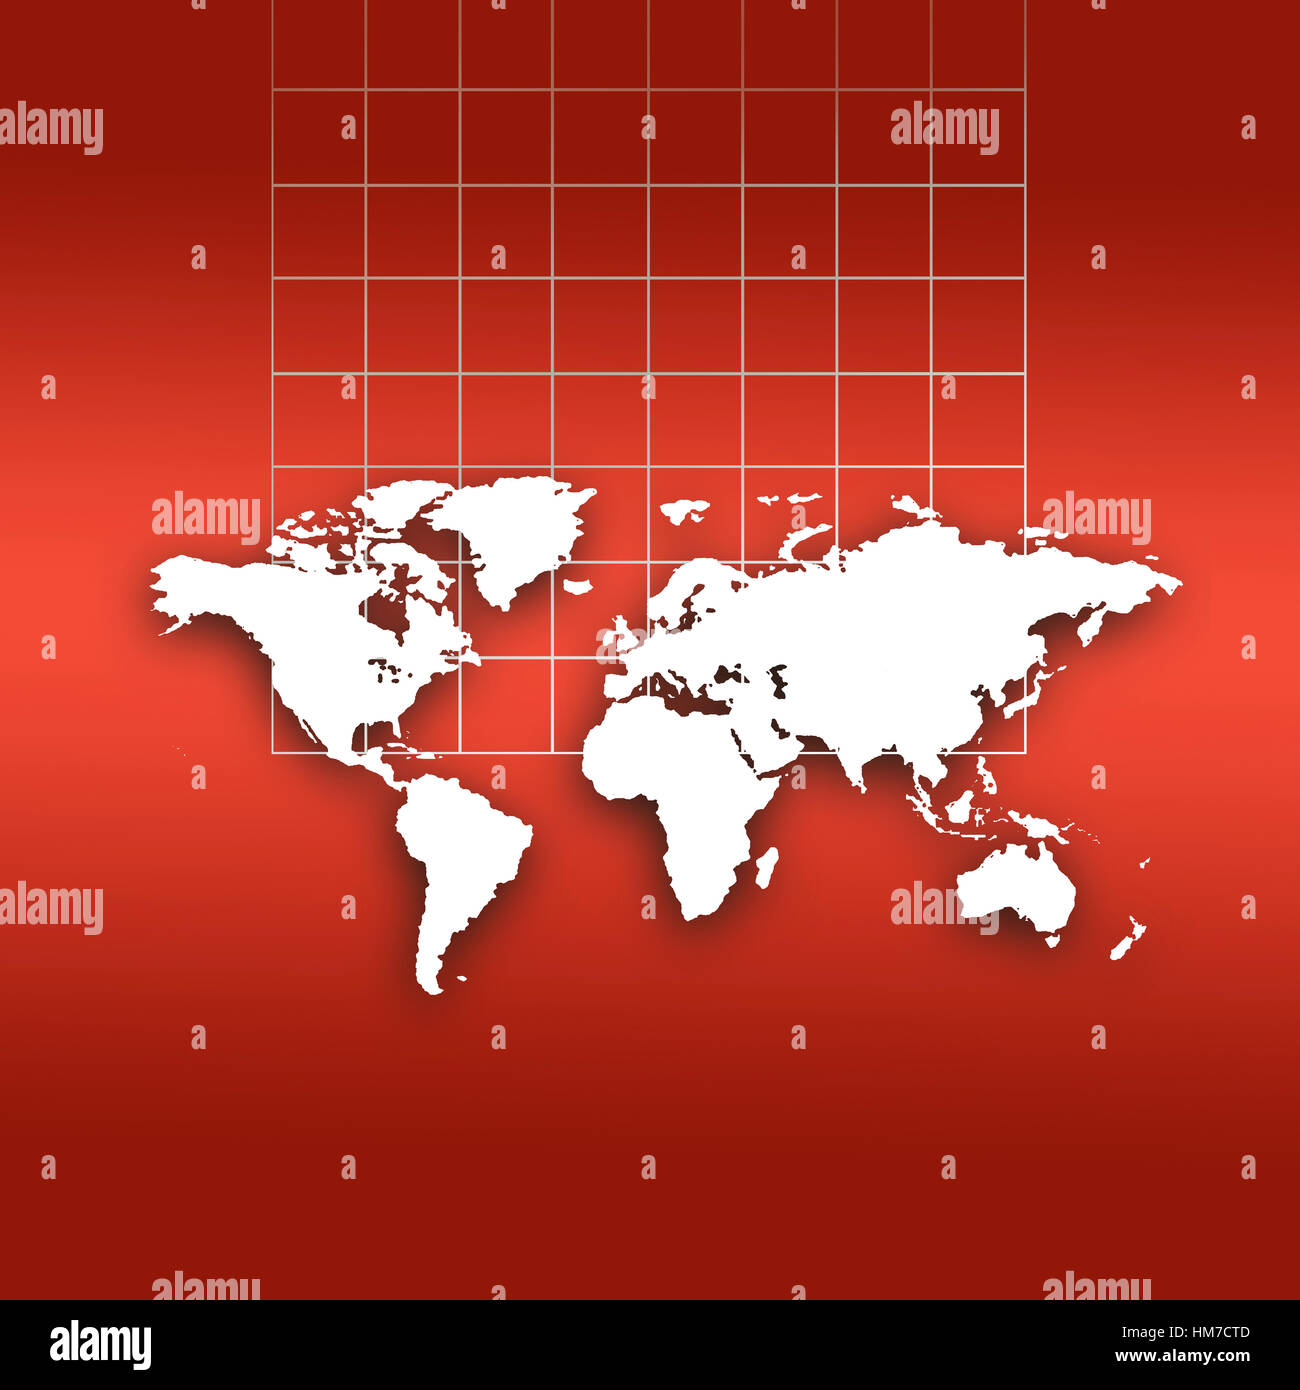 World map outlines and grid on red background Stock Photo